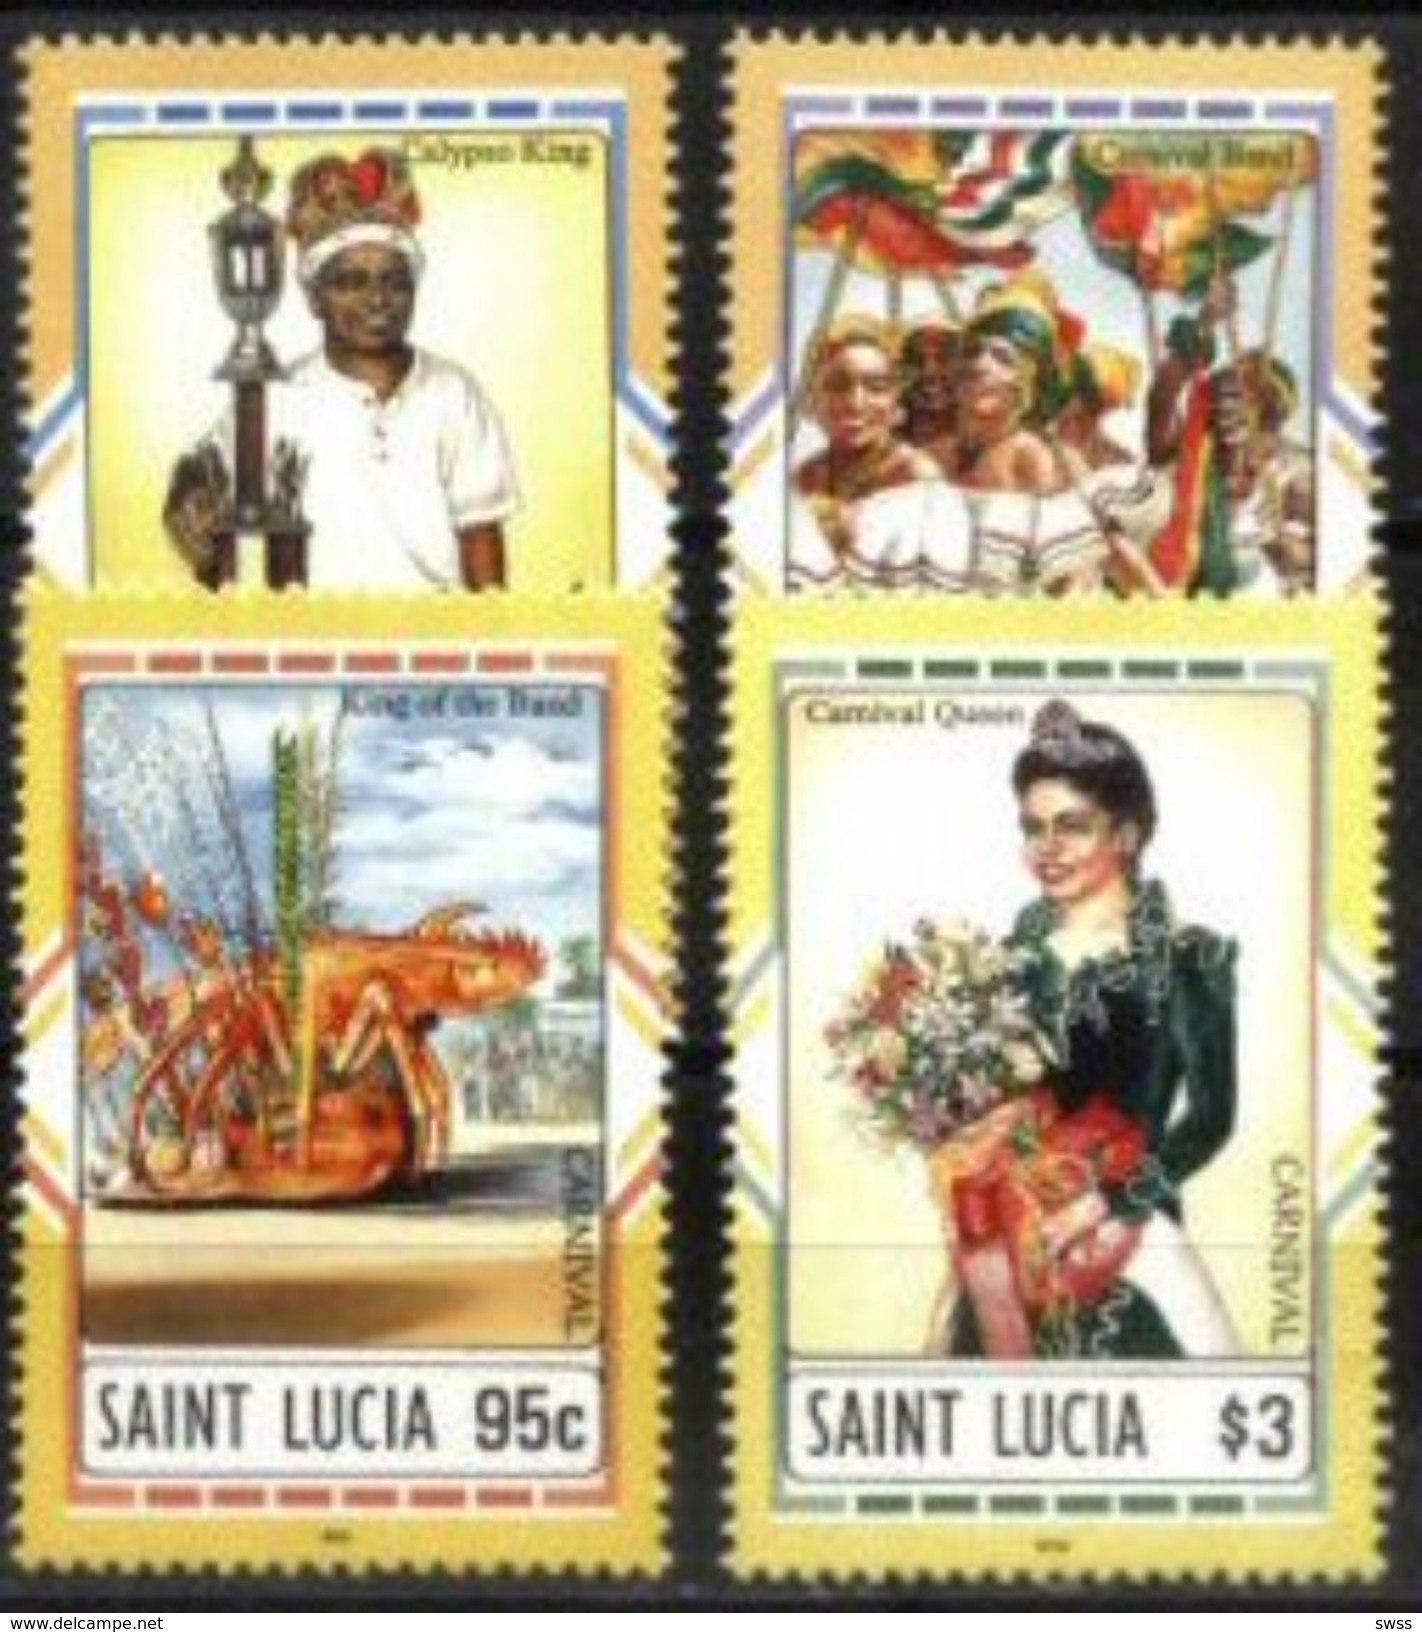 ST. LUCIA, 1996, CARNIVAL, YV#1027-30, MNH - St.Lucia (1979-...)